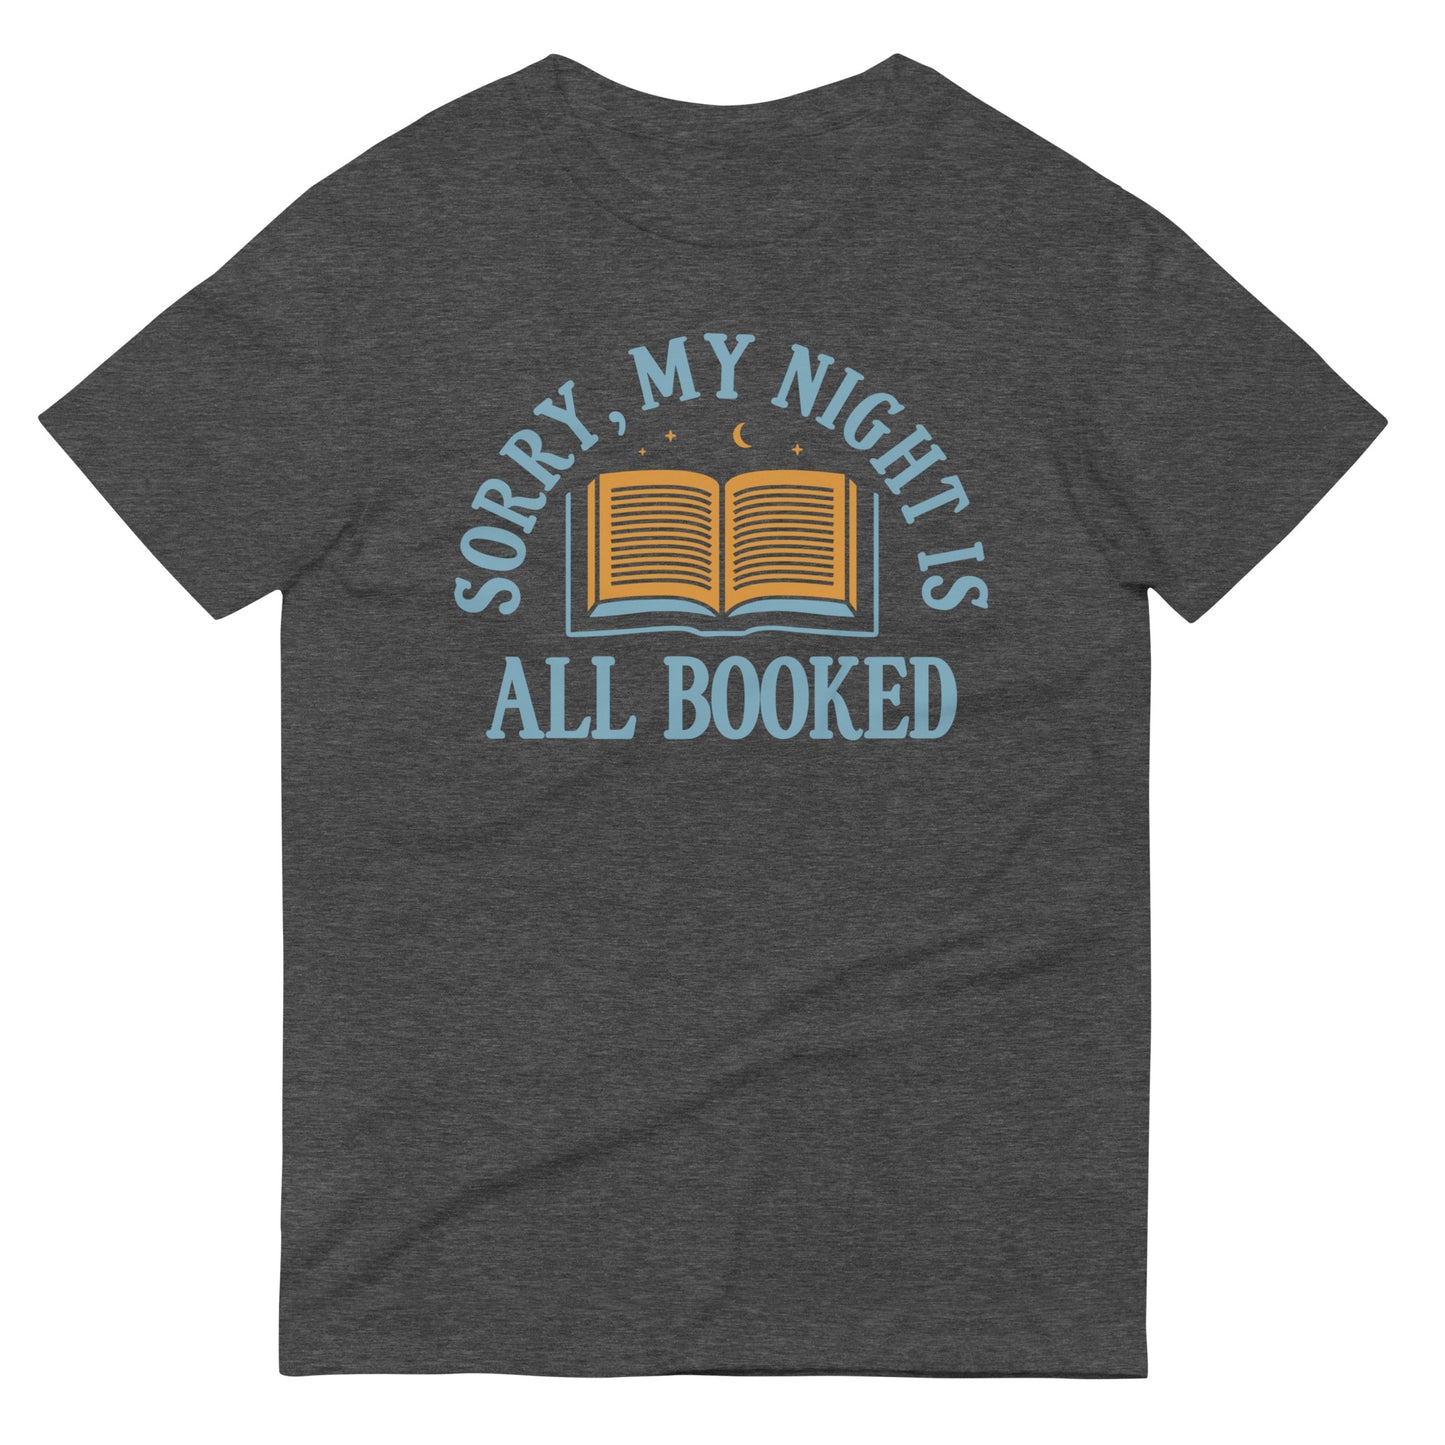 Sorry, My Night Is All Booked Men's Signature Tee